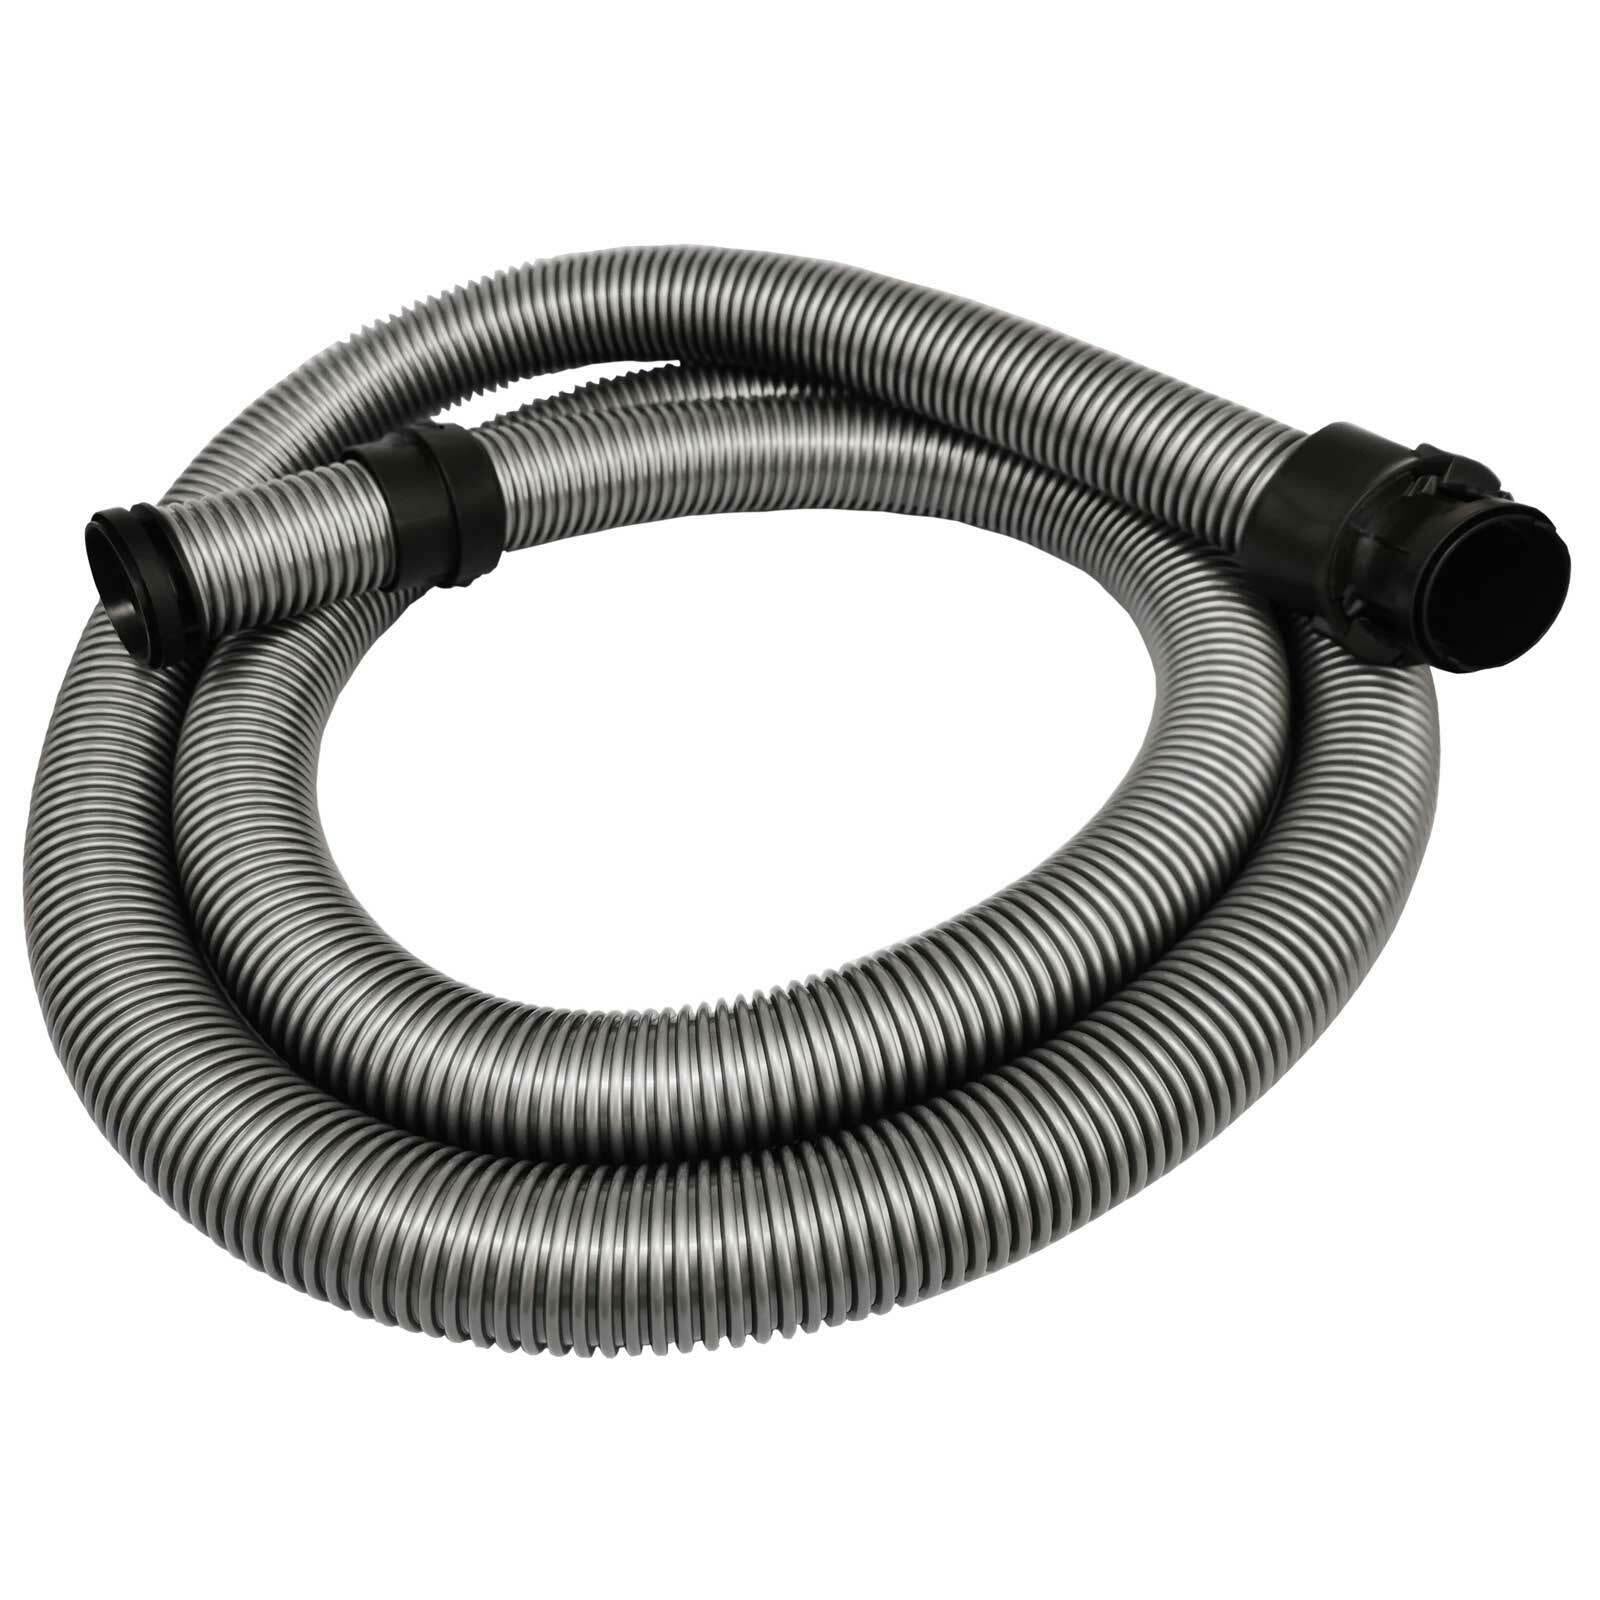 Vacuum Suction Hose 2.5M for Miele S6780 S6790 C3 Complete S8 SDAB3 Sparesbarn